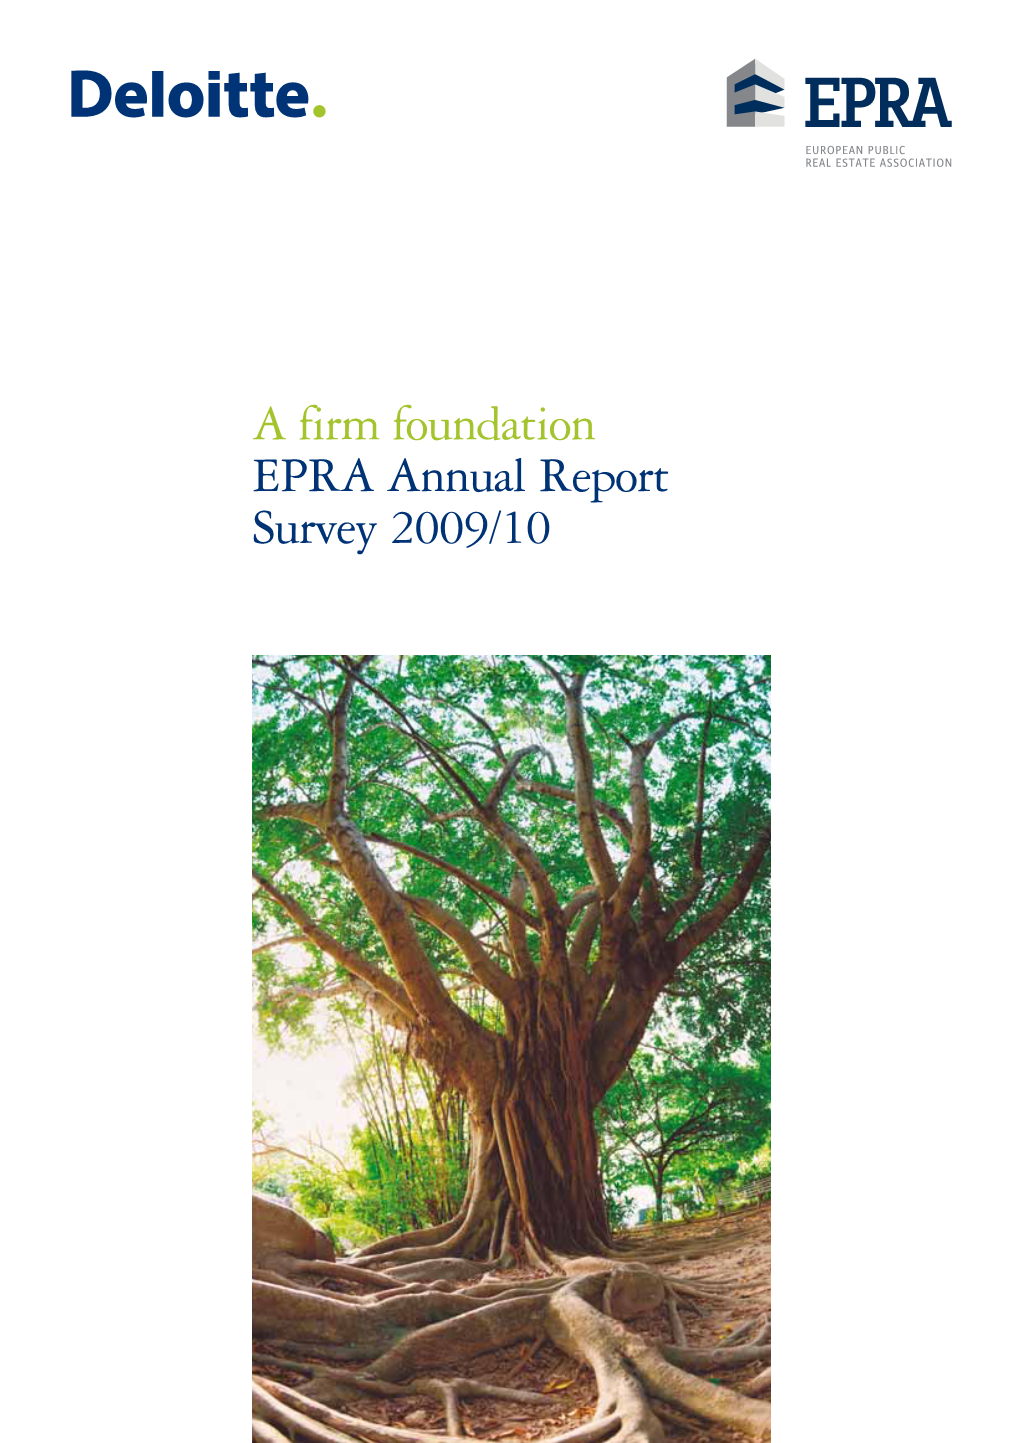 A Firm Foundation EPRA Annual Report Survey 2009/10 5652A Jc EPRA Report VI A4 LLP 31/08/2010 11:43 Page B